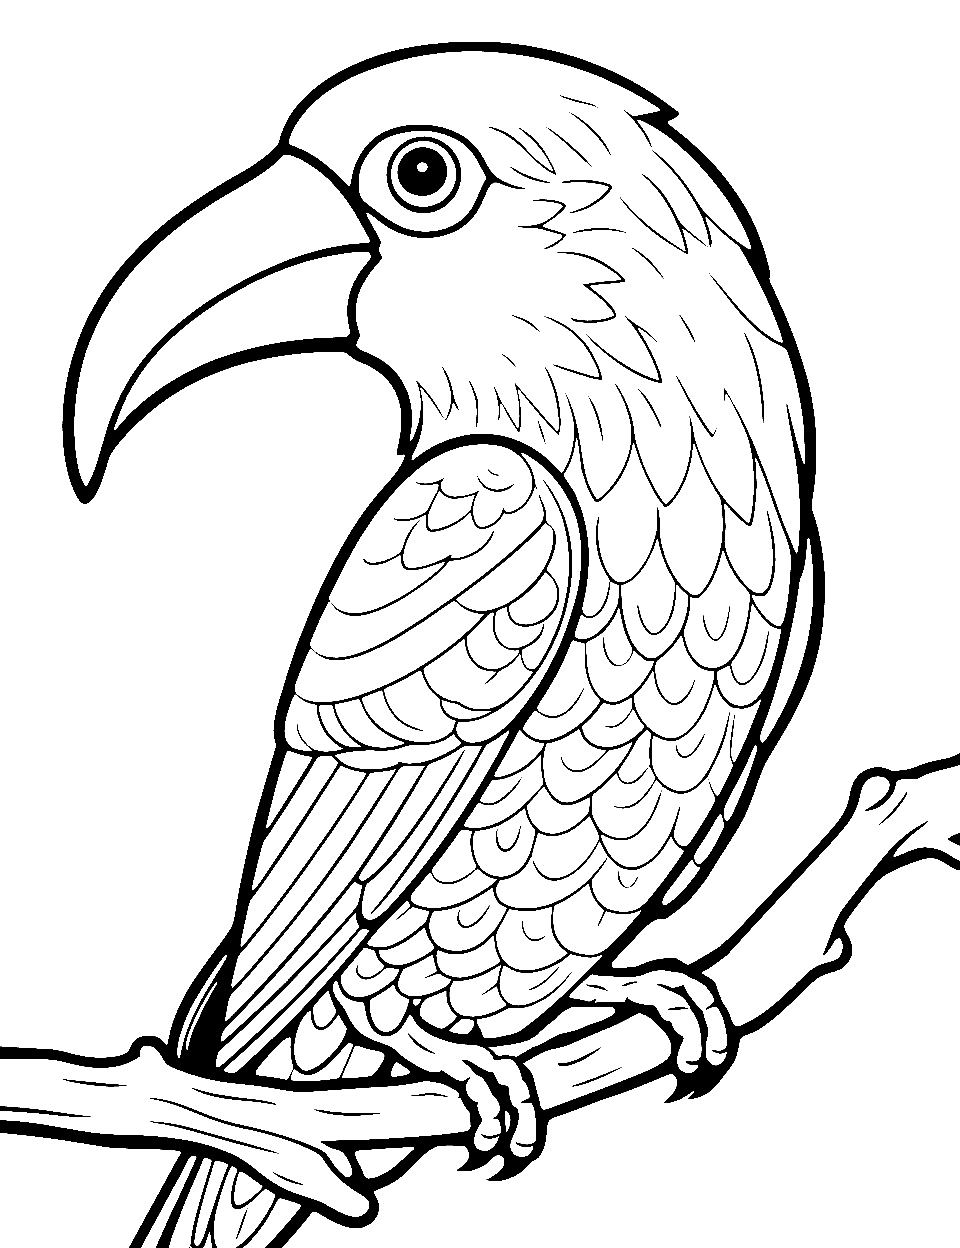 Toucan's Rainbow Beak Coloring Page - A close-up of a toucan’s vibrant, multi-colored beak.